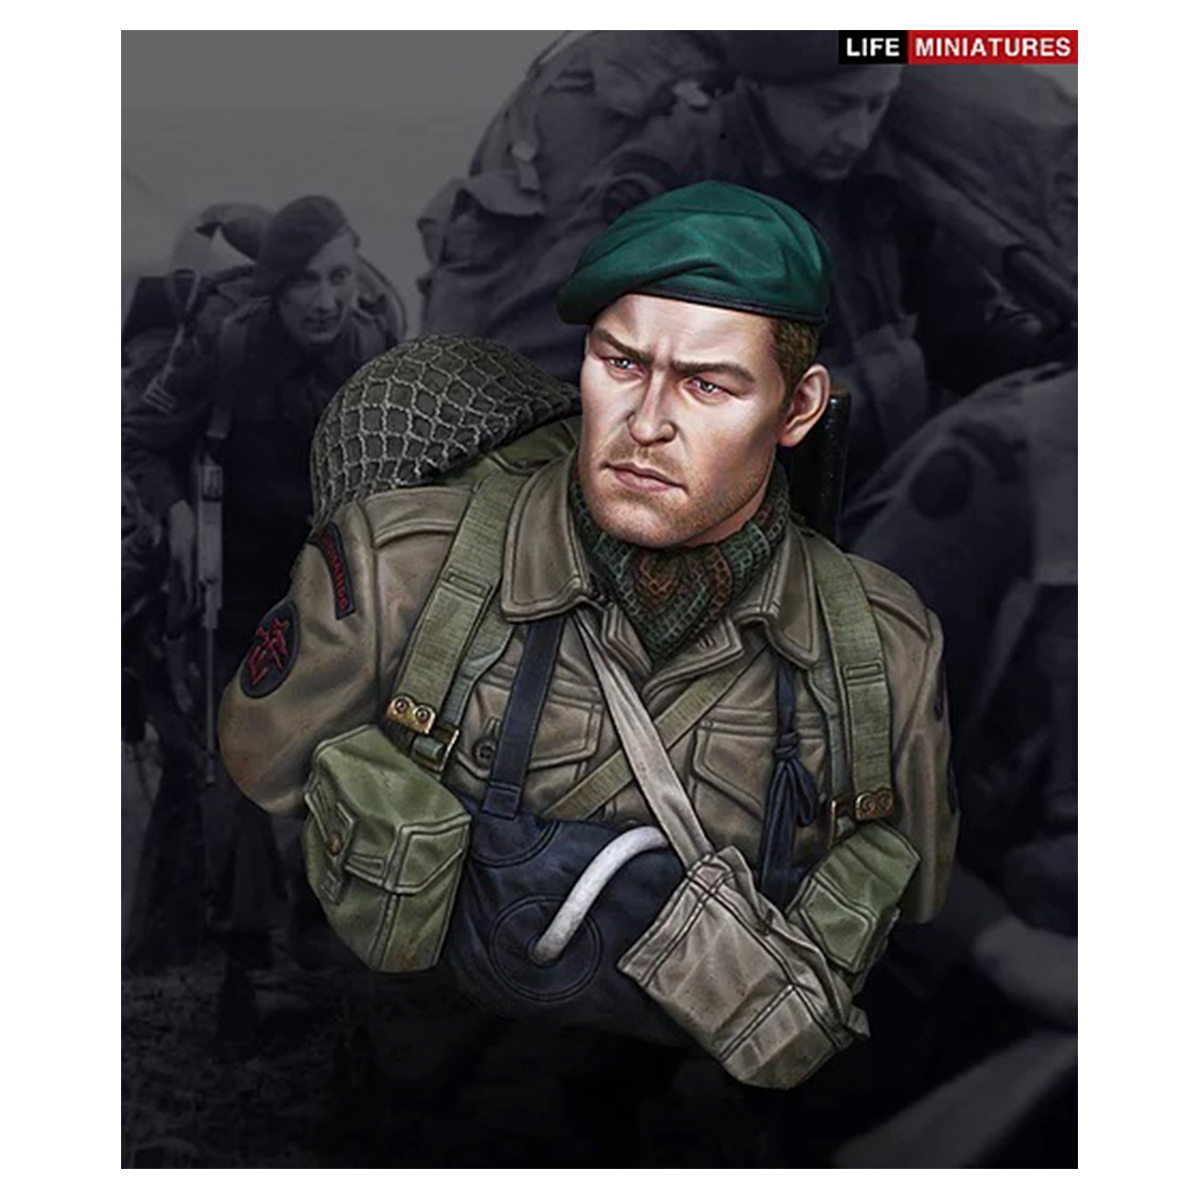 Life Miniatures – WW2 British Commando on D-Day, June 1944 – 1/10 bust